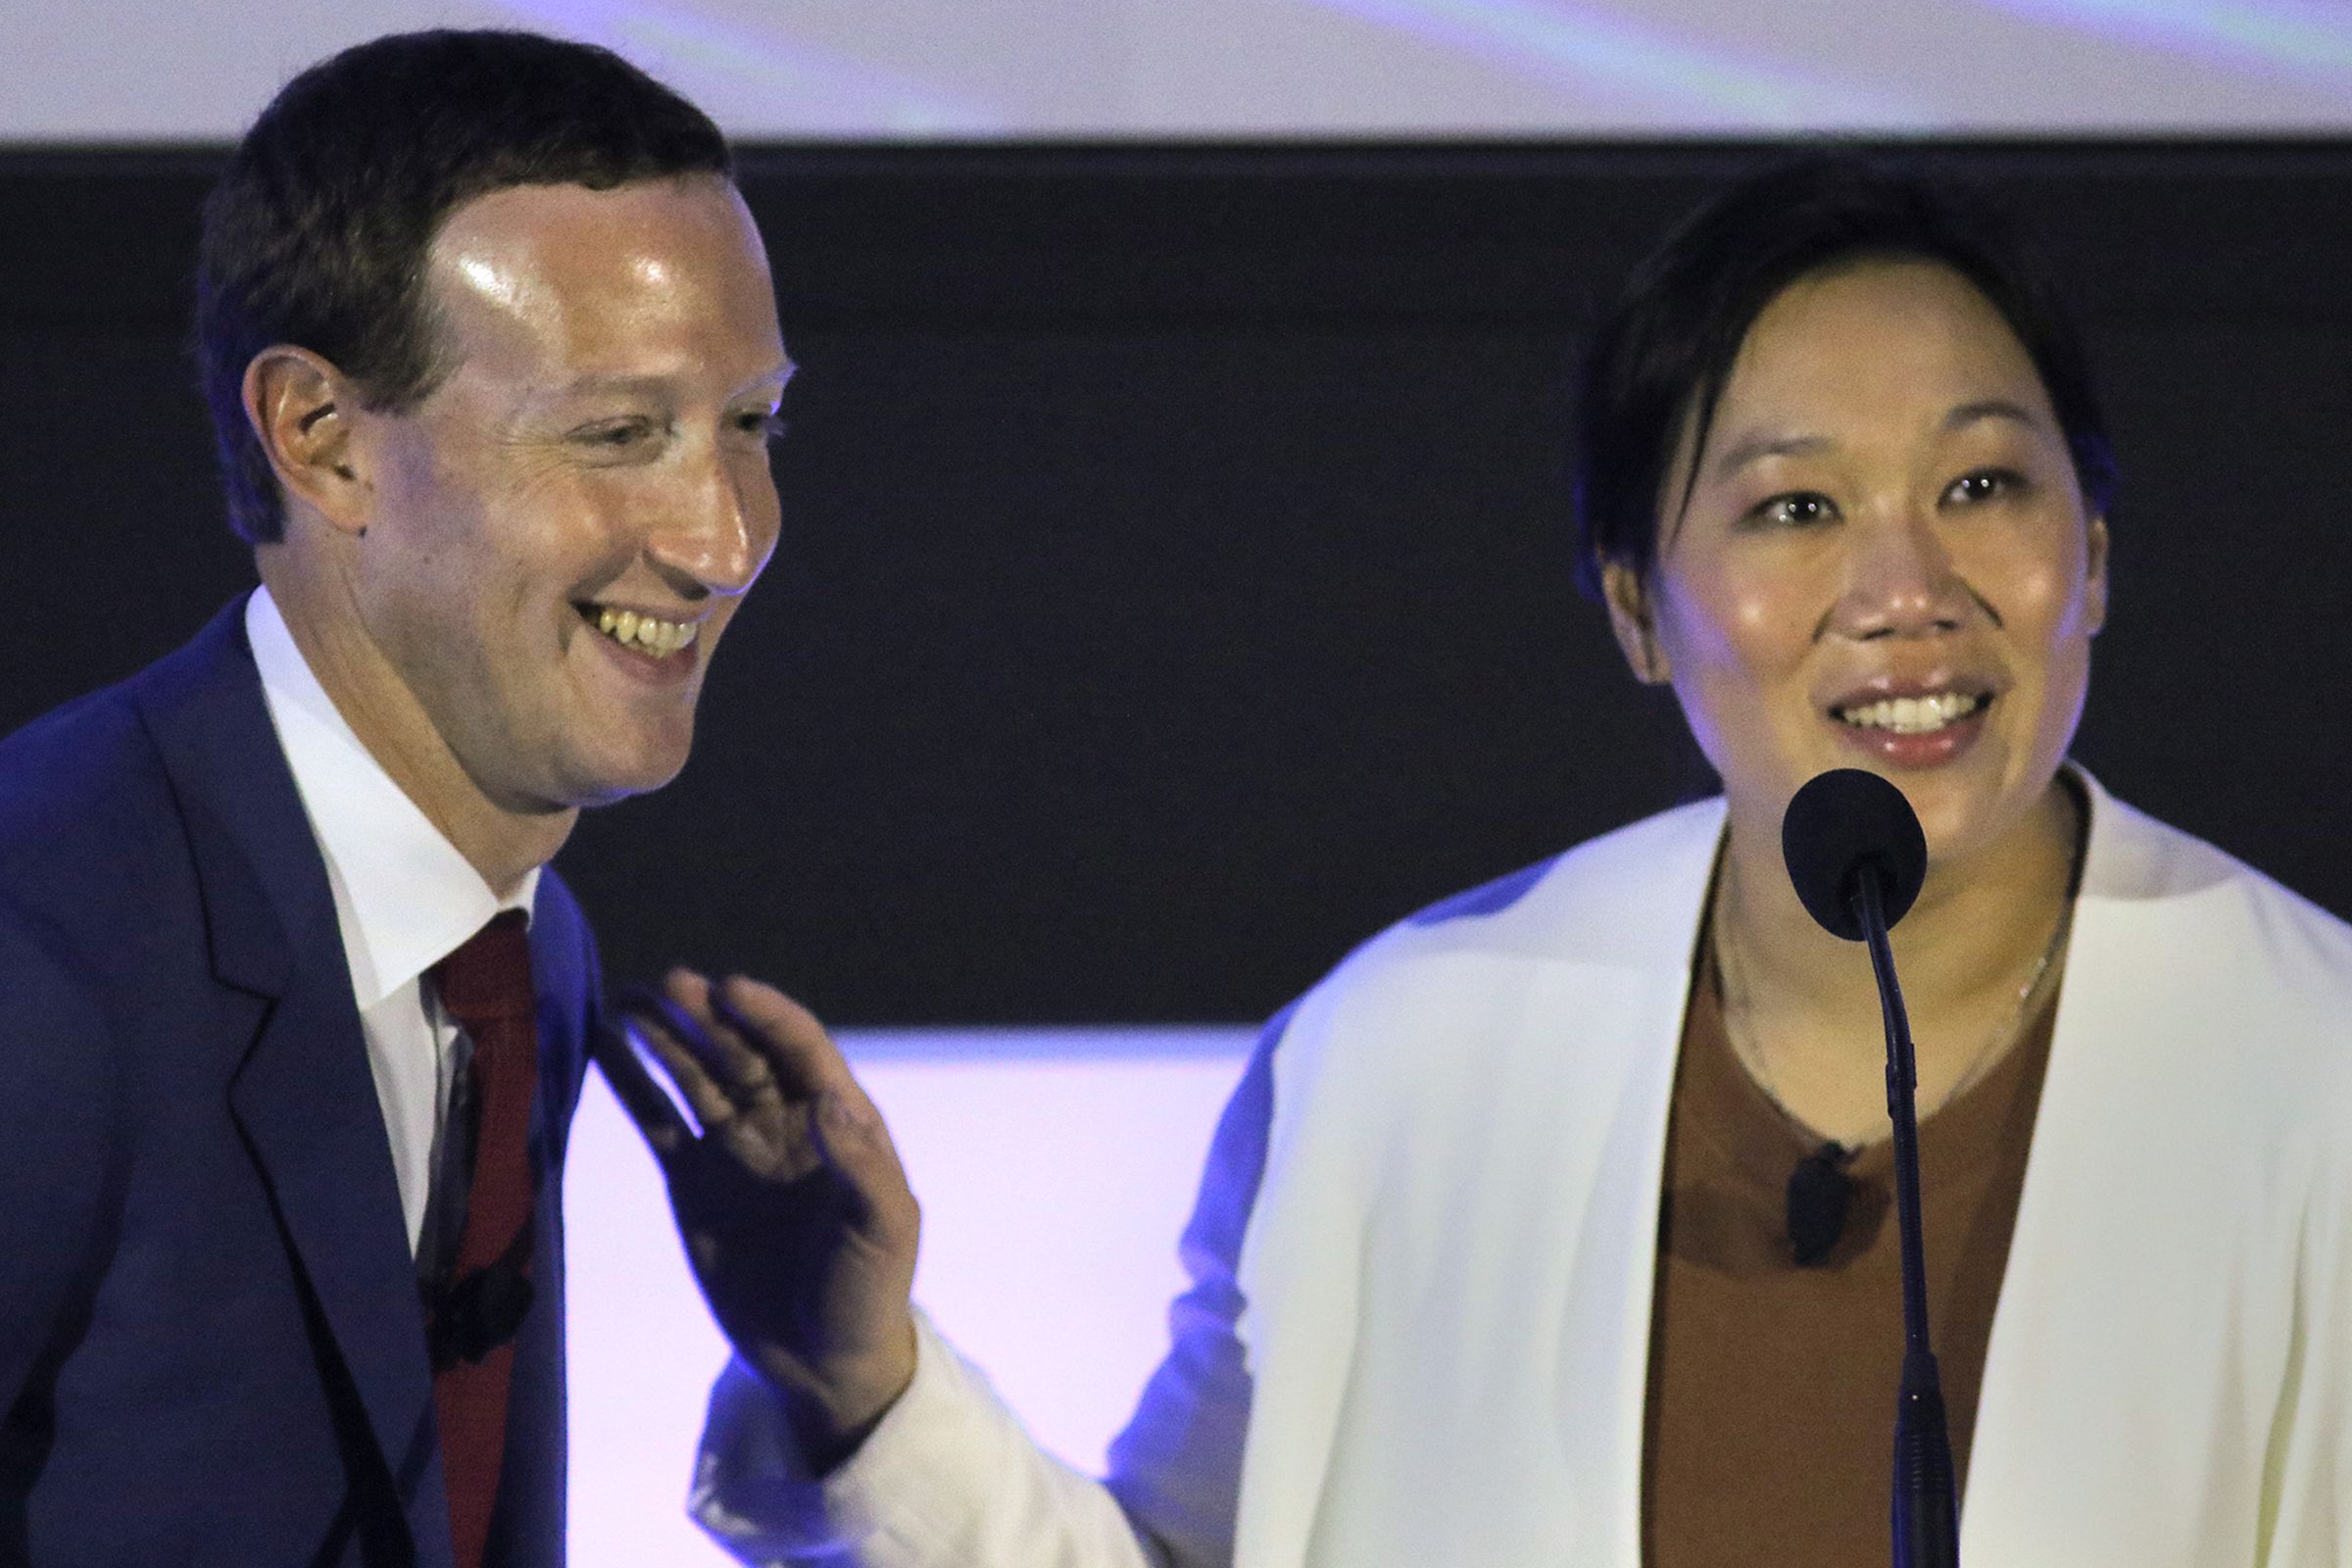 Mark Zuckerberg and Priscilla Chan stand next to each other smiling